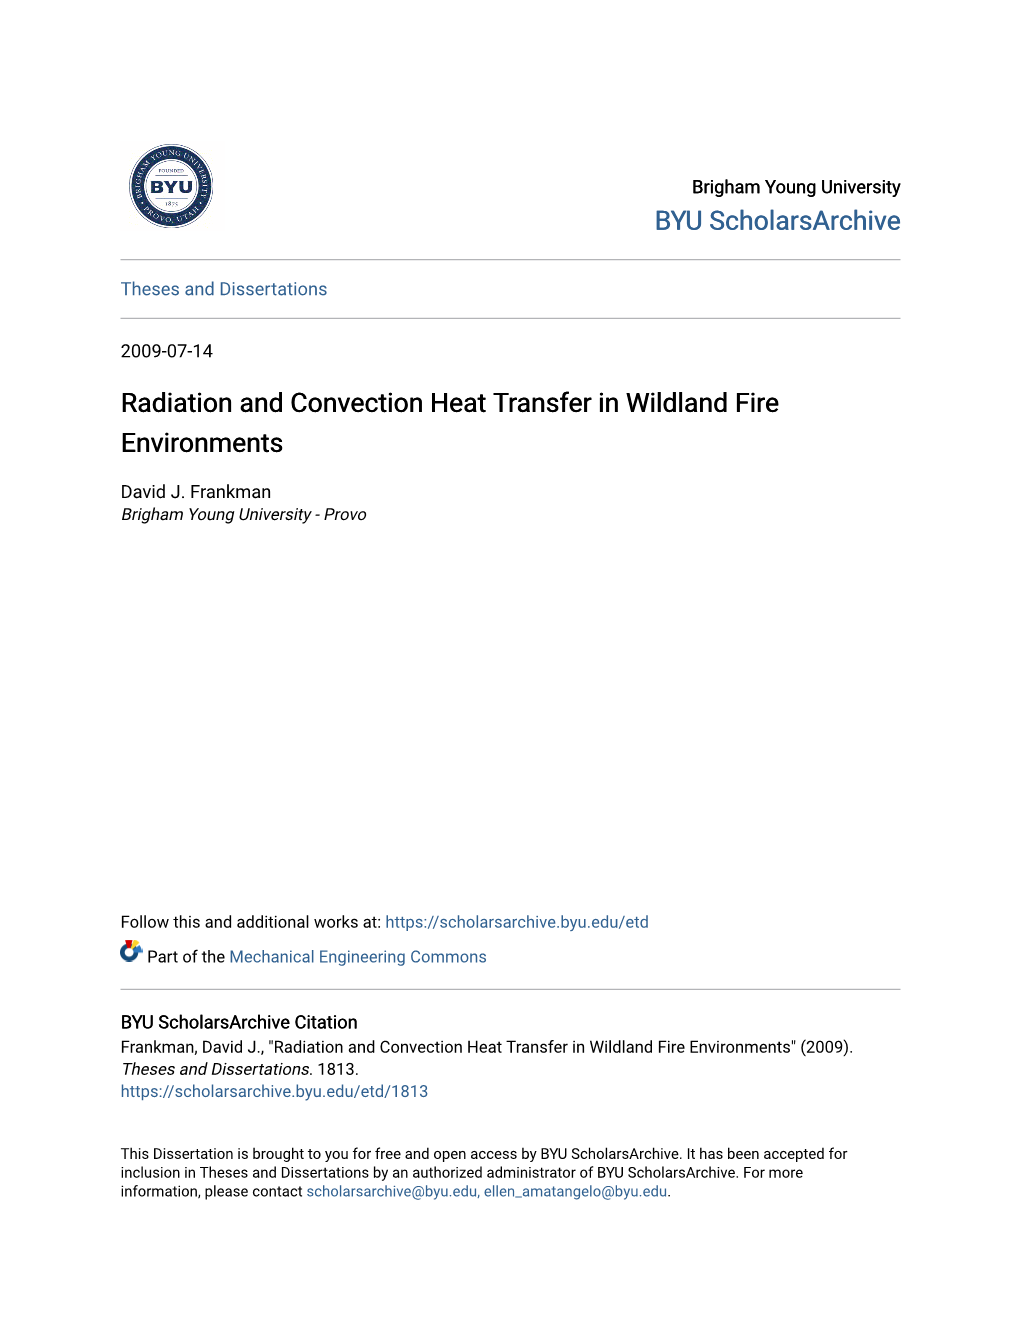 Radiation and Convection Heat Transfer in Wildland Fire Environments